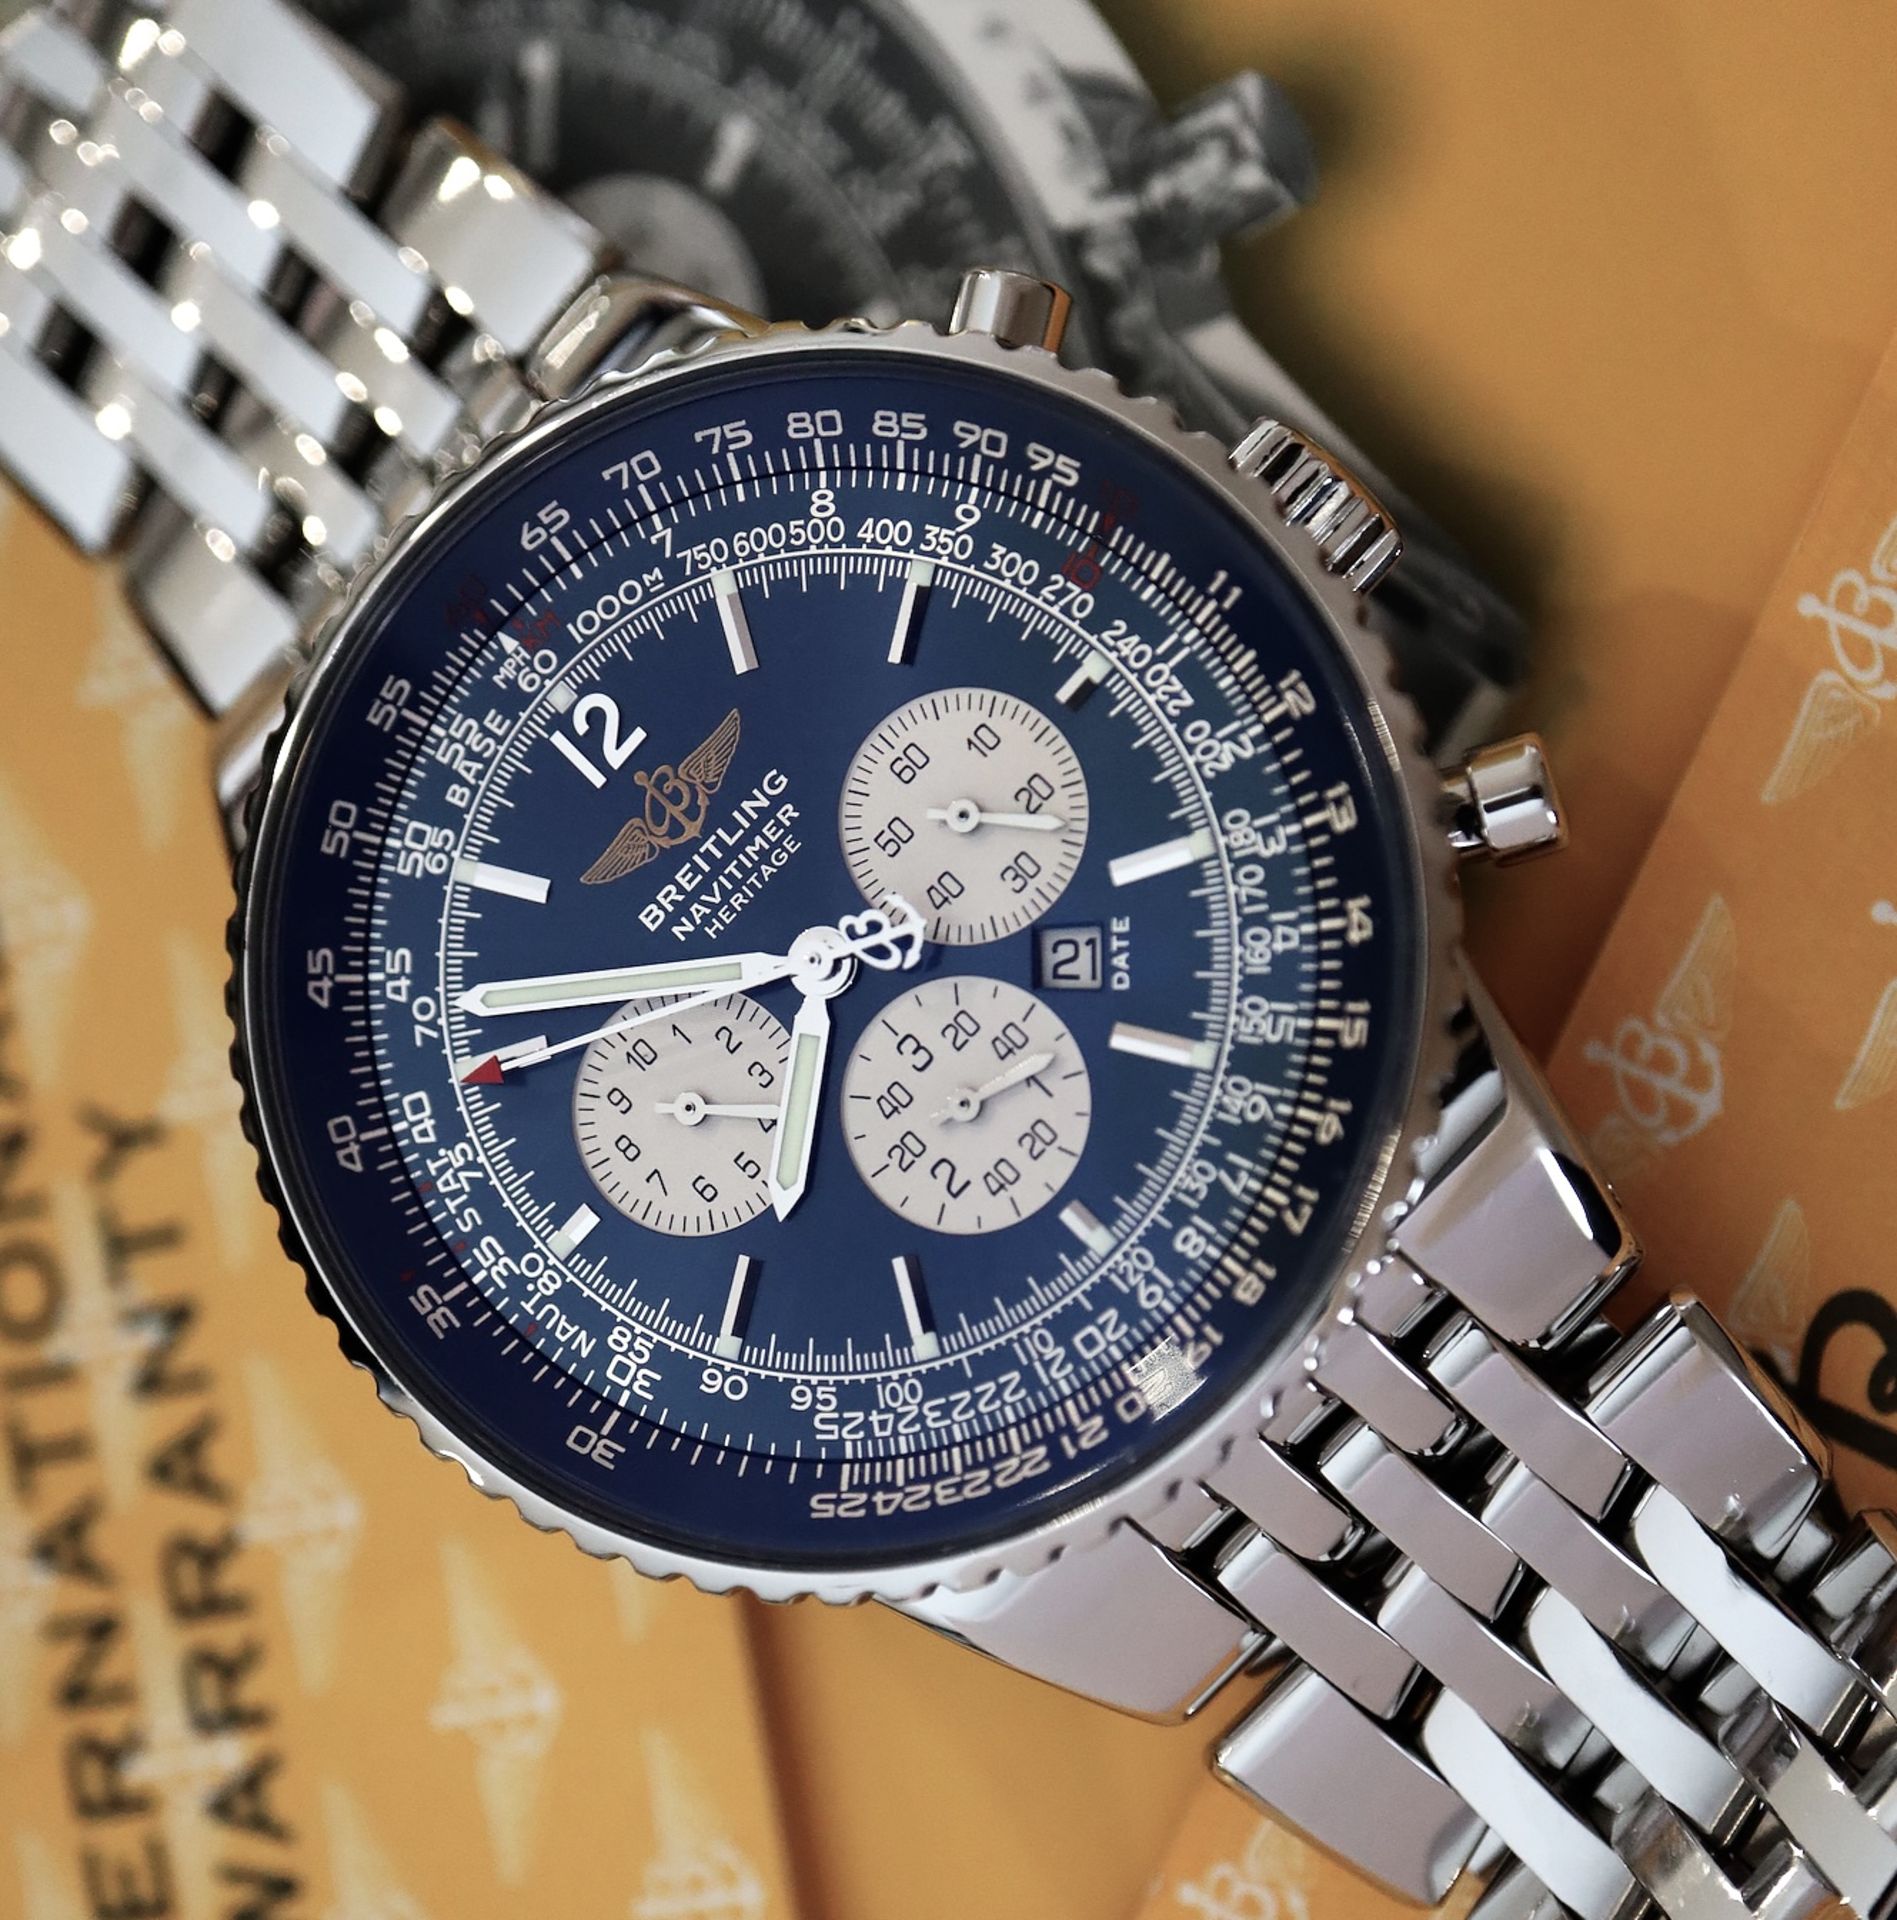 BREITLING NAVITIMER HERITAGE CHRONOGRAPH (REF. A35350) 'FULL SET - BOX, CERTS. ETC.' NAVY DIAL - Image 10 of 15